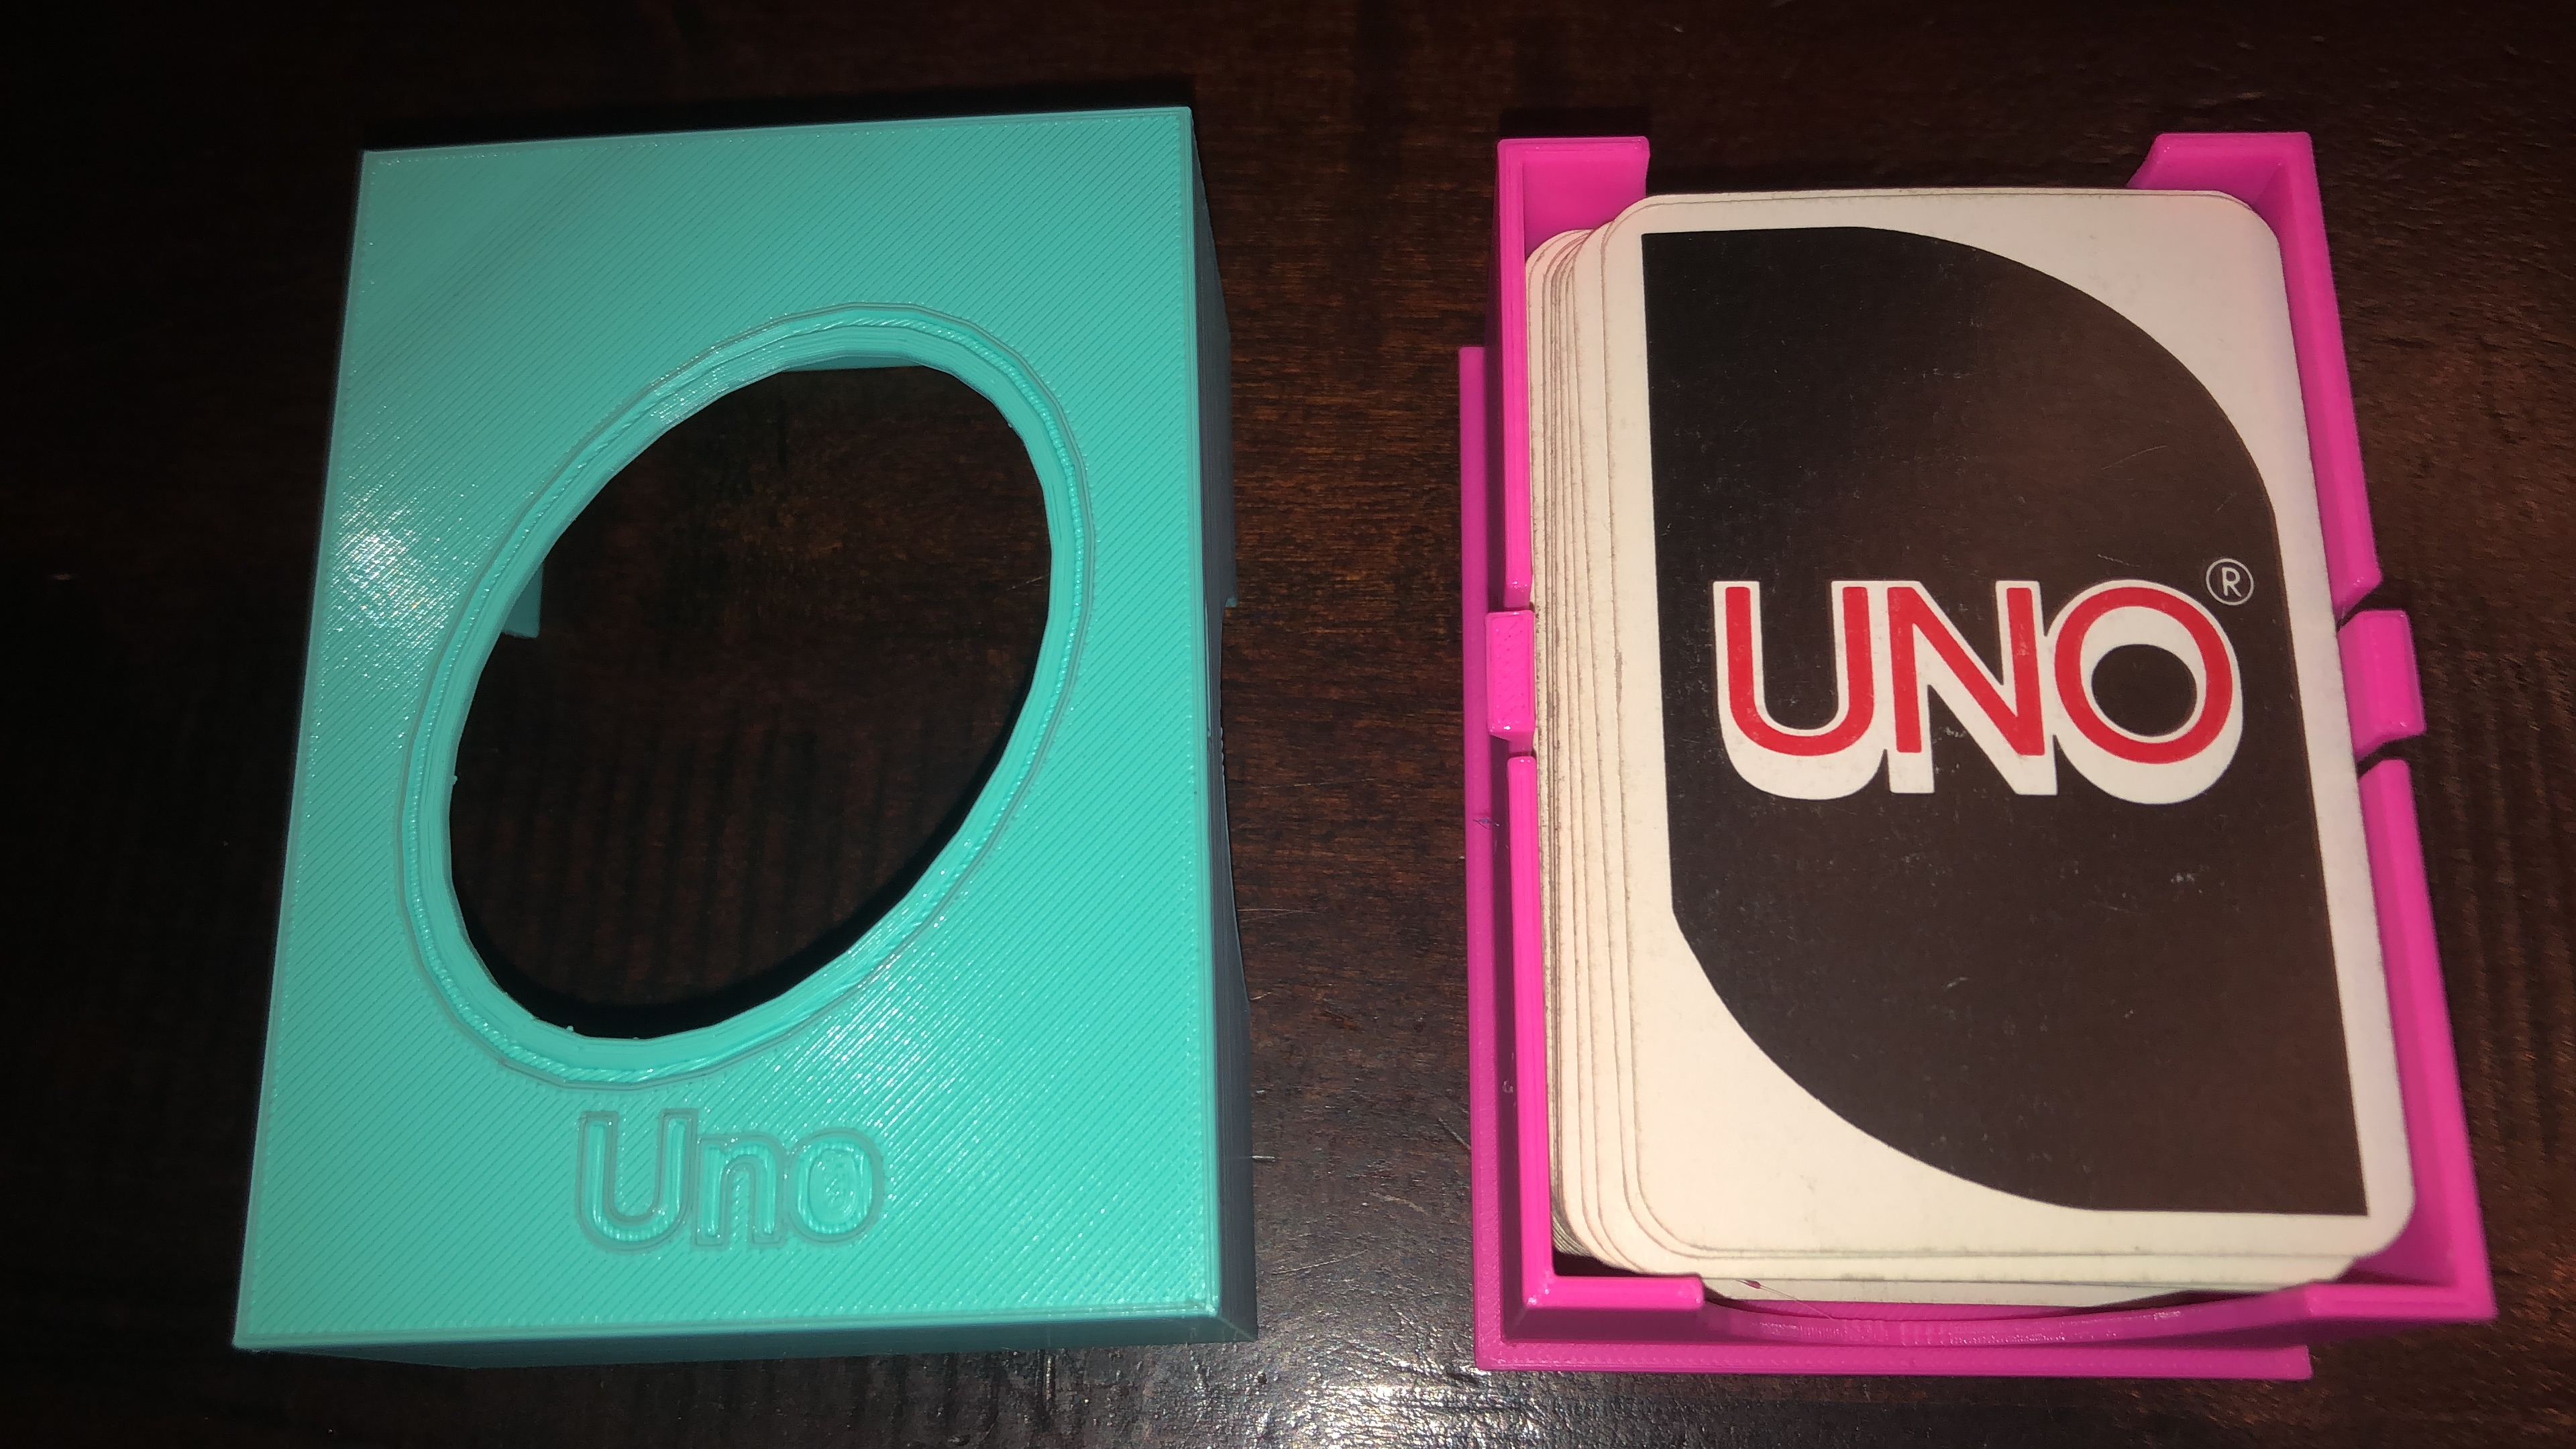 A storage box for double UNO card game